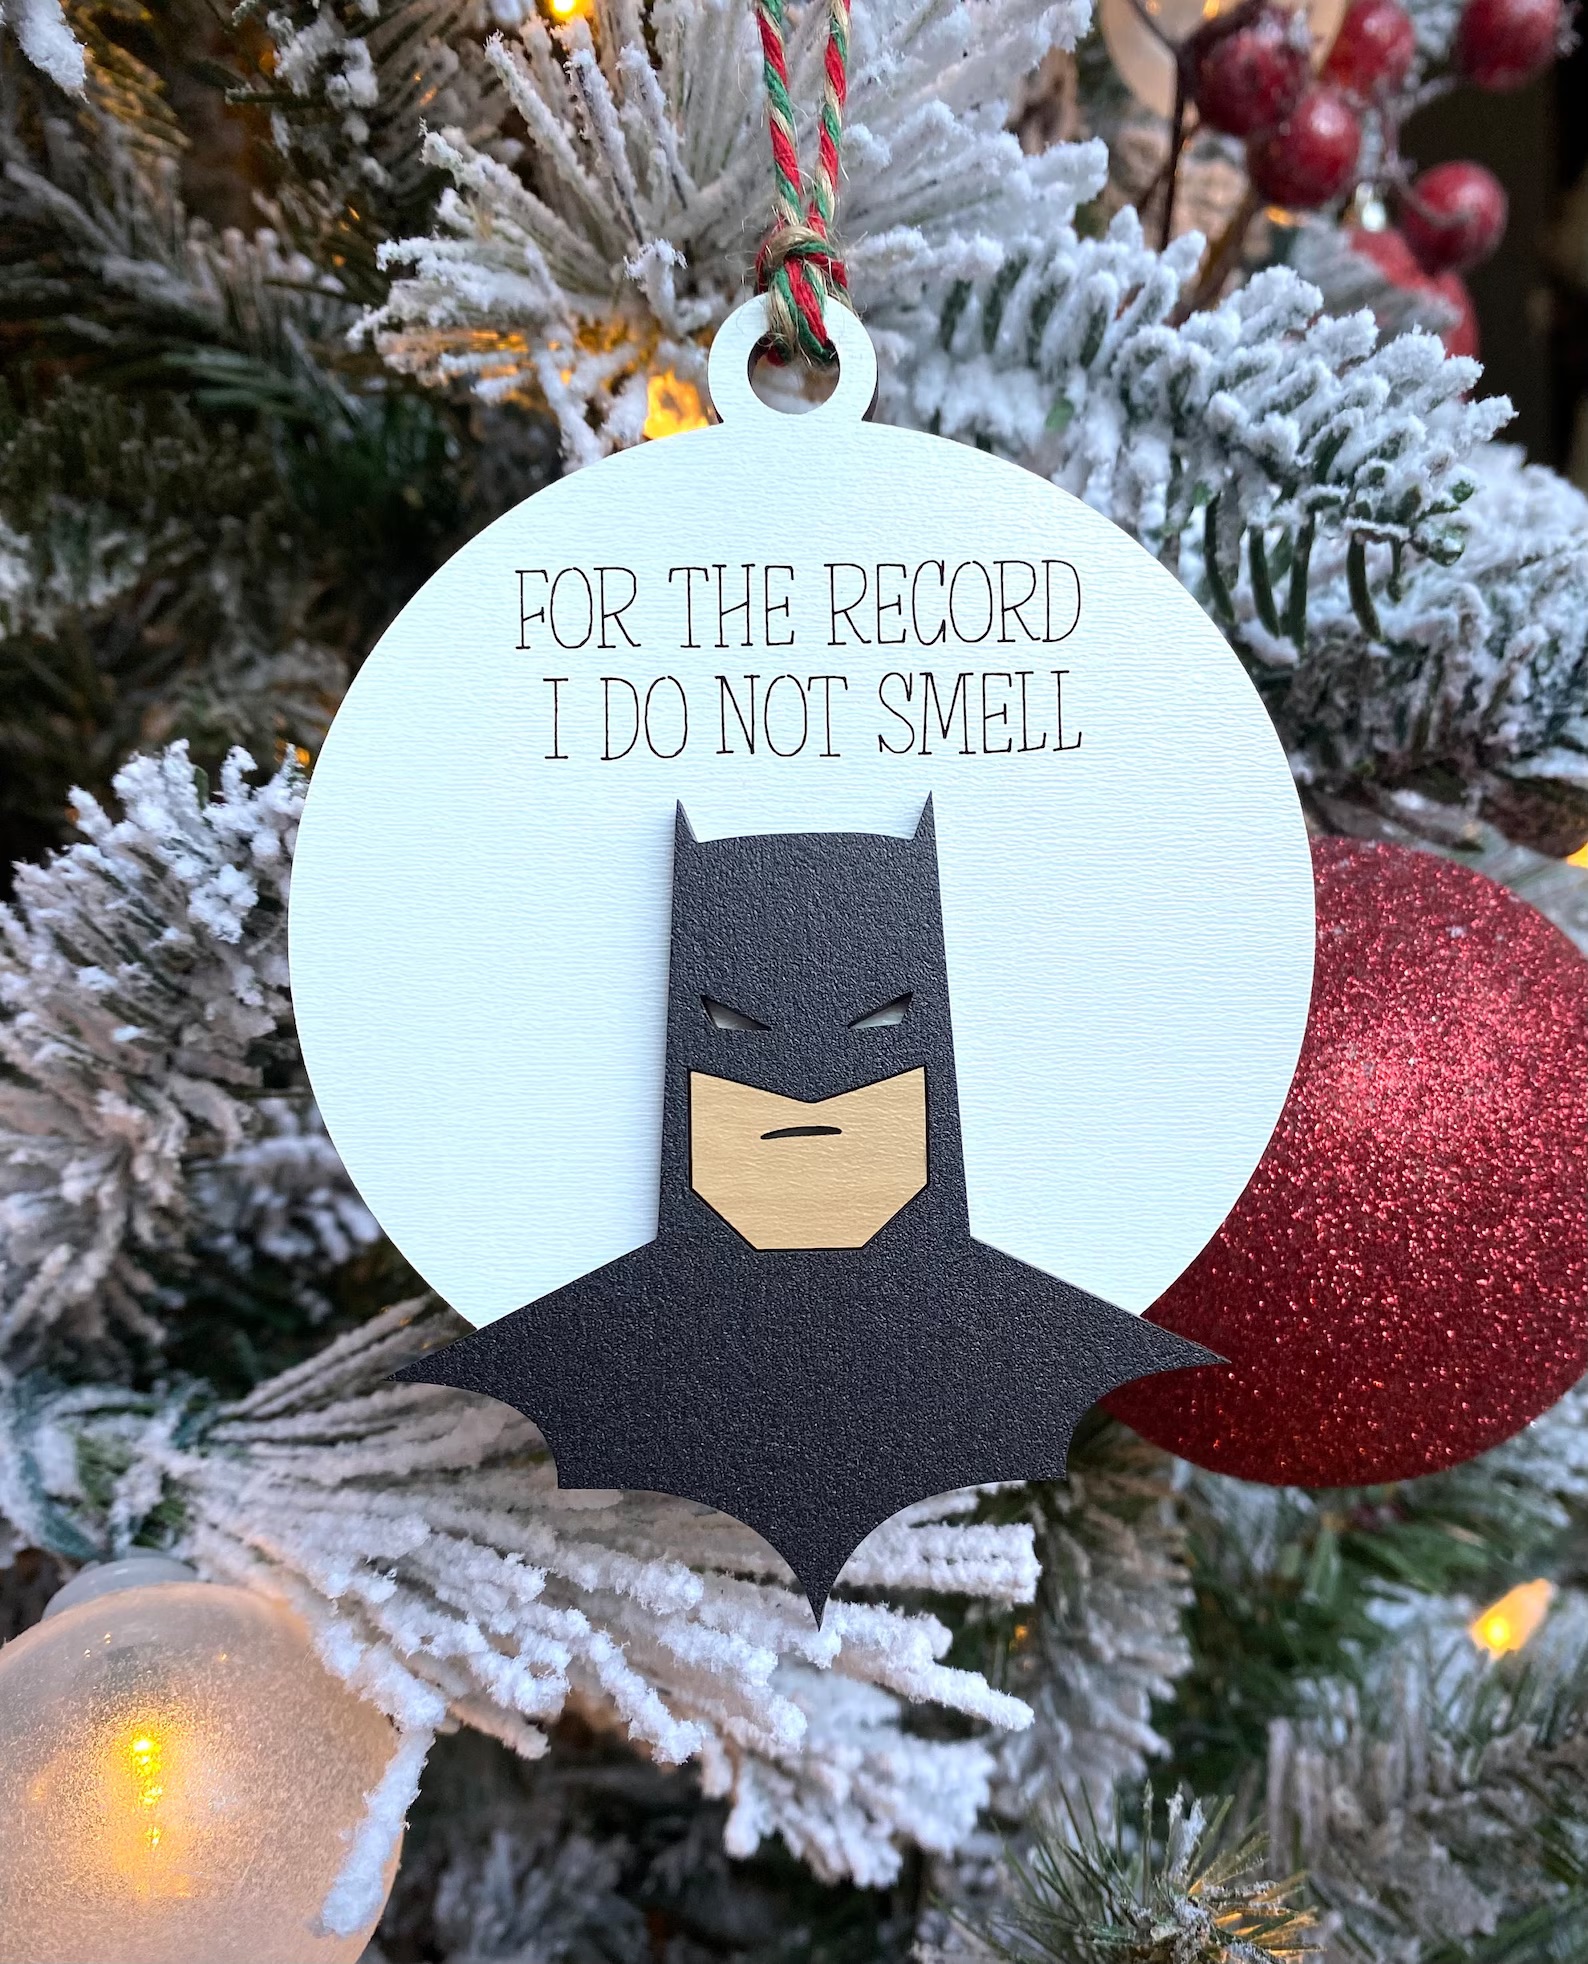 a Batman Christmas ornament with the text "For the record, I do not smell"